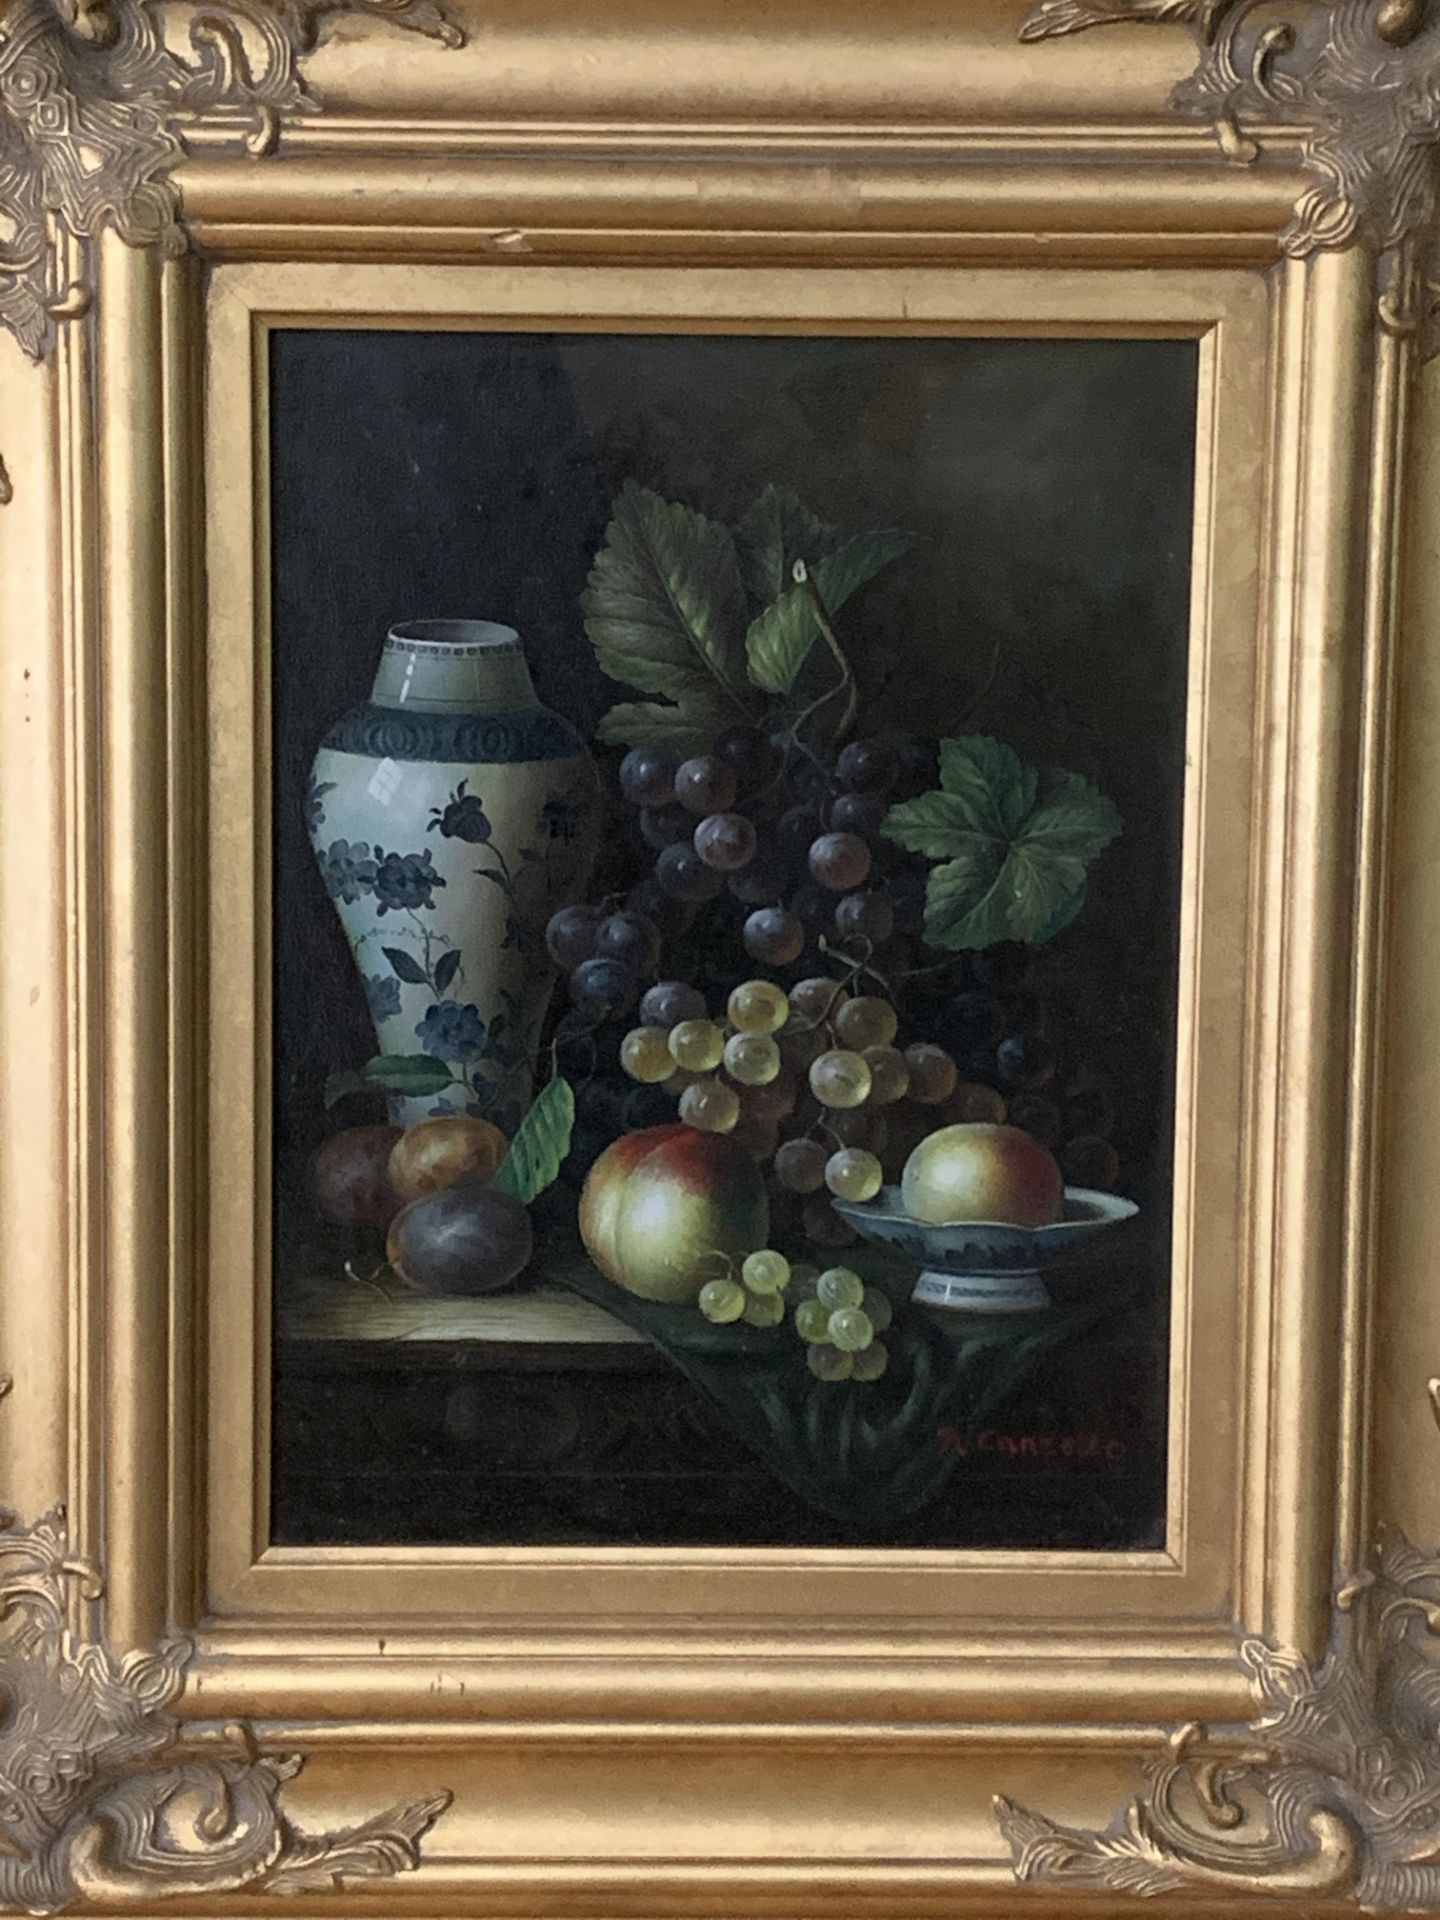 Two gilt framed oil on canvas paintings by R. Canzelo - Image 2 of 2